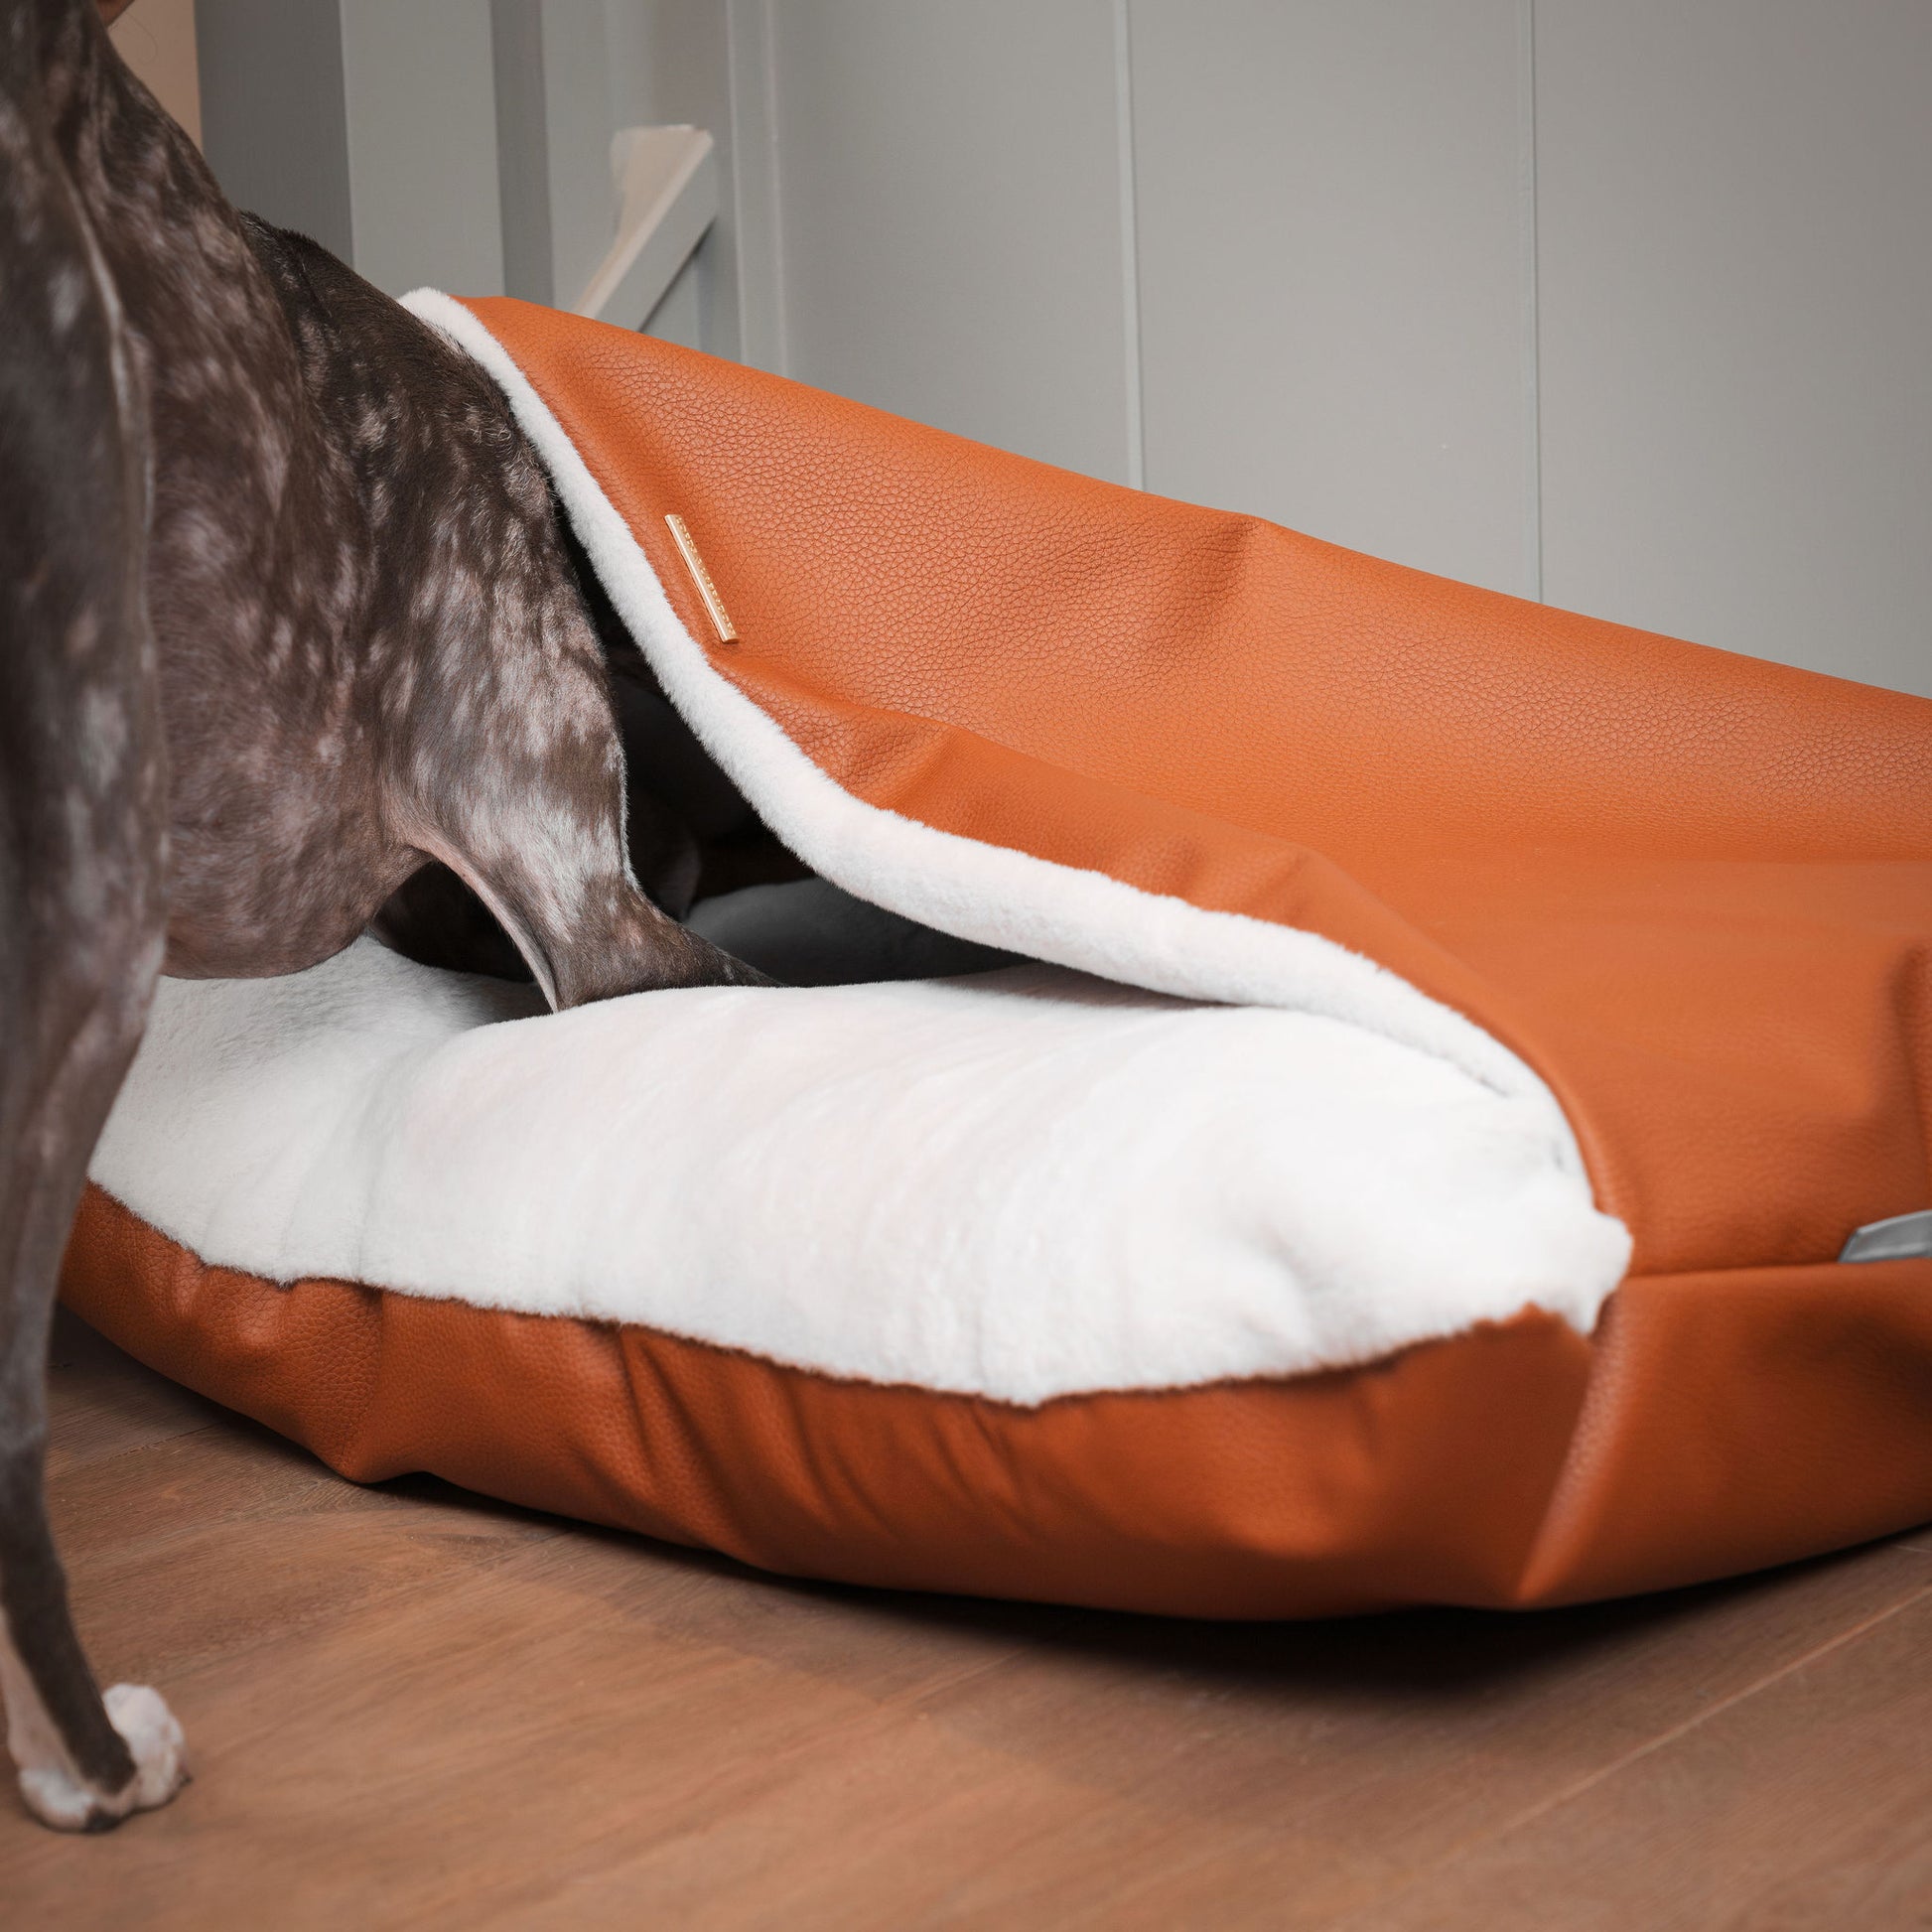  Discover The Perfect Burrow For Your Pet, Our Stunning Sleepy Burrow Dog Beds In Ember Rhino Faux Leather Is The Perfect Bed Choice For Your Pet, Available Now at Lords & Labradors